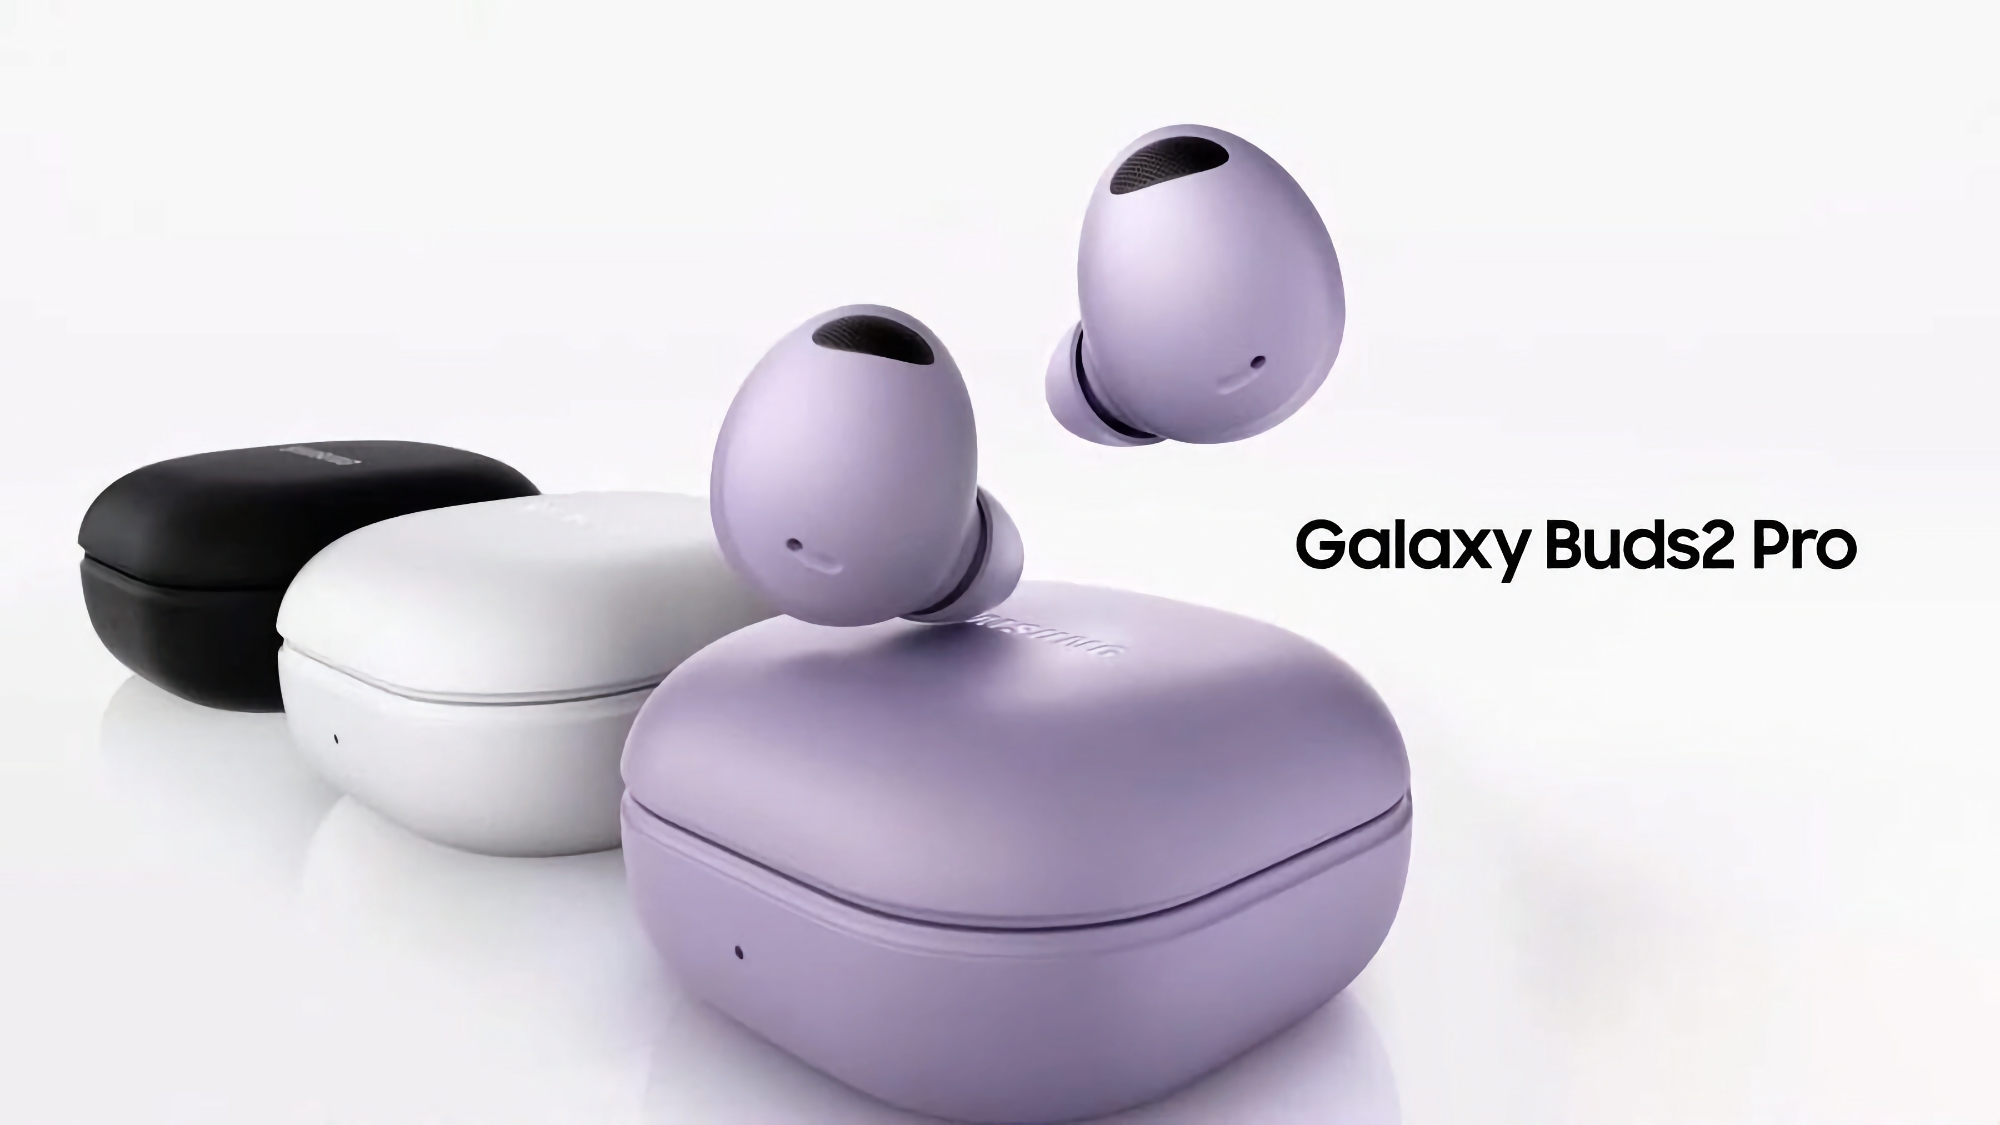 Samsung has improved the Ambient Sound feature in Galaxy Buds 2 Pro with an update